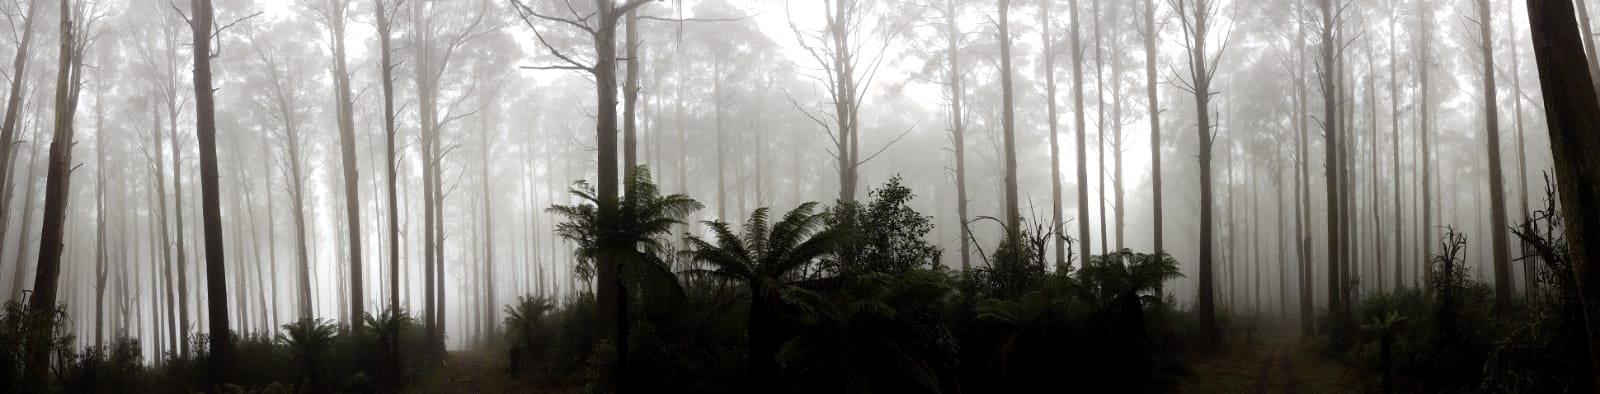 Misty paranorama of trees in the Yarra Ranges